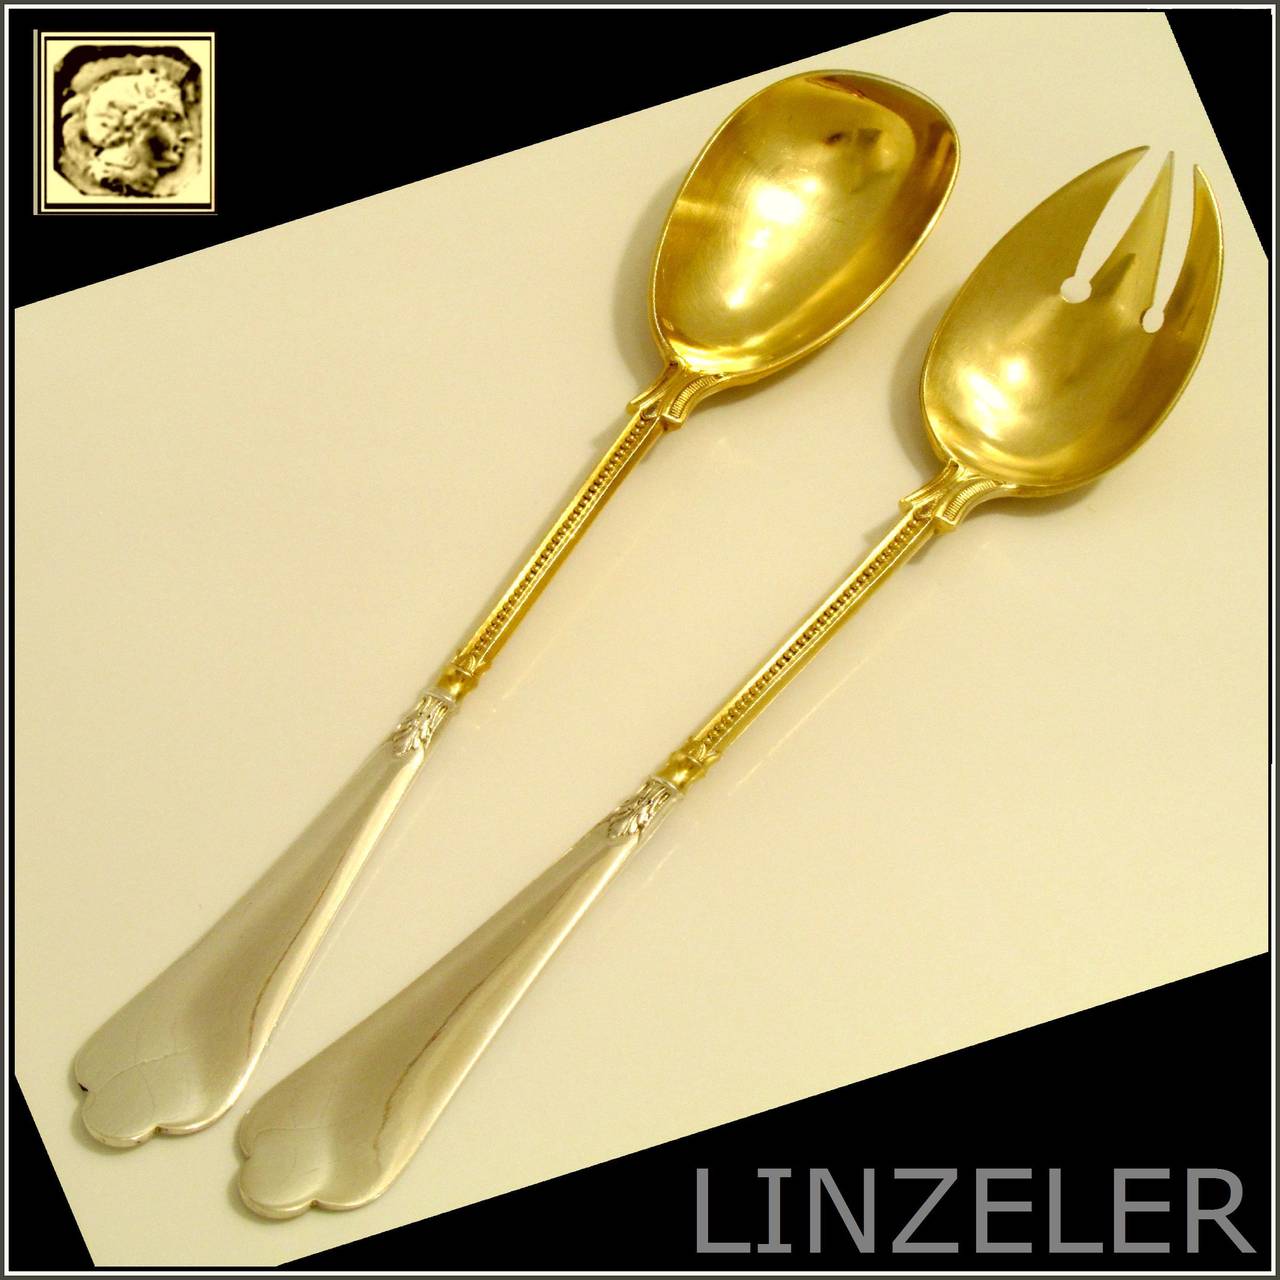 Linzeler Top French All Sterling Silver Vermeil Salad Serving Set 2 pc 

Head of Minerva 1 st titre for 950/1000 French Sterling Vermeil Silver guarantee.

This salad serving set is comprised of a three-tined fork and a spoon with the polylobed